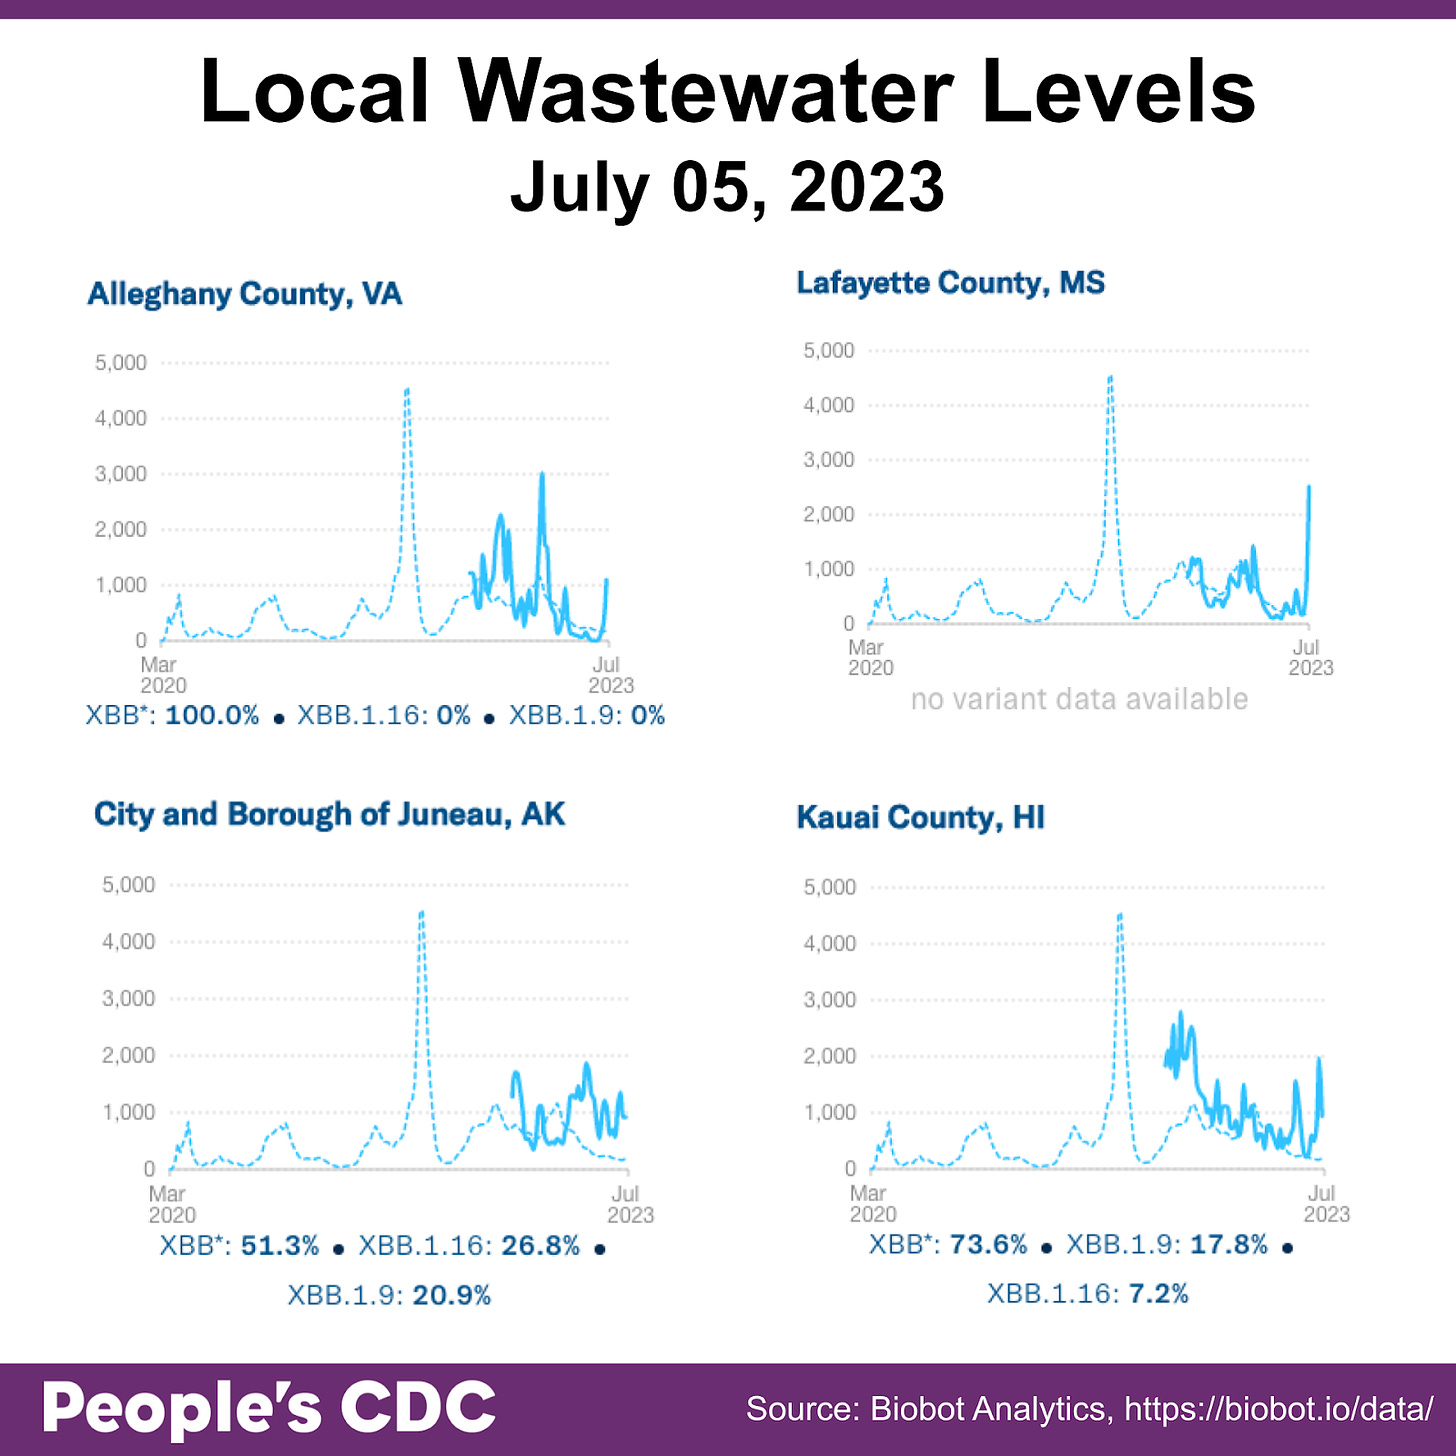 Title reads “Local Wastewater Levels July 05, 2023.” Four line graphs show wastewater levels, a solid blue line, in four counties across the United States from March 2020 to July 2023. Each graph compares the county-level data to the national average, represented by a dotted blue line. The top left graph is titled “Alleghany County, VA,” and shows peaks in September 2022 and January 2023, with current levels rising sharply. Below the graph in blue text reads, “XBB*: 100 percent, XBB.1.16: 0 percent, XBB.1.9: 0 percent.” The top right graph is titled “Lafayette County, MS,” and shows peaks in September 2022 and February 2023, with current levels rising sharply. Below the graph in gray text reads, “No variant data available.” The lower left graph is titled “City and Borough of Juneau, AK,” and shows peaks in September 2022 and March 2023, with current levels dropping. Below the graph in blue text reads, “XBB*: 51.3 percent, XBB.1.16: 26.8 percent, XBB.1.9: 20.9 percent.” The lower right graph is titled “Kauai County, HI,” and shows peaks in June 2022, September 2022, April 2023, and June 2023, with current levels dropping. Below the graph in blue text reads, “XBB*: 73.6 percent, XBB.1.16: 17.8 percent, XBB.1.9: 7.2 percent.”